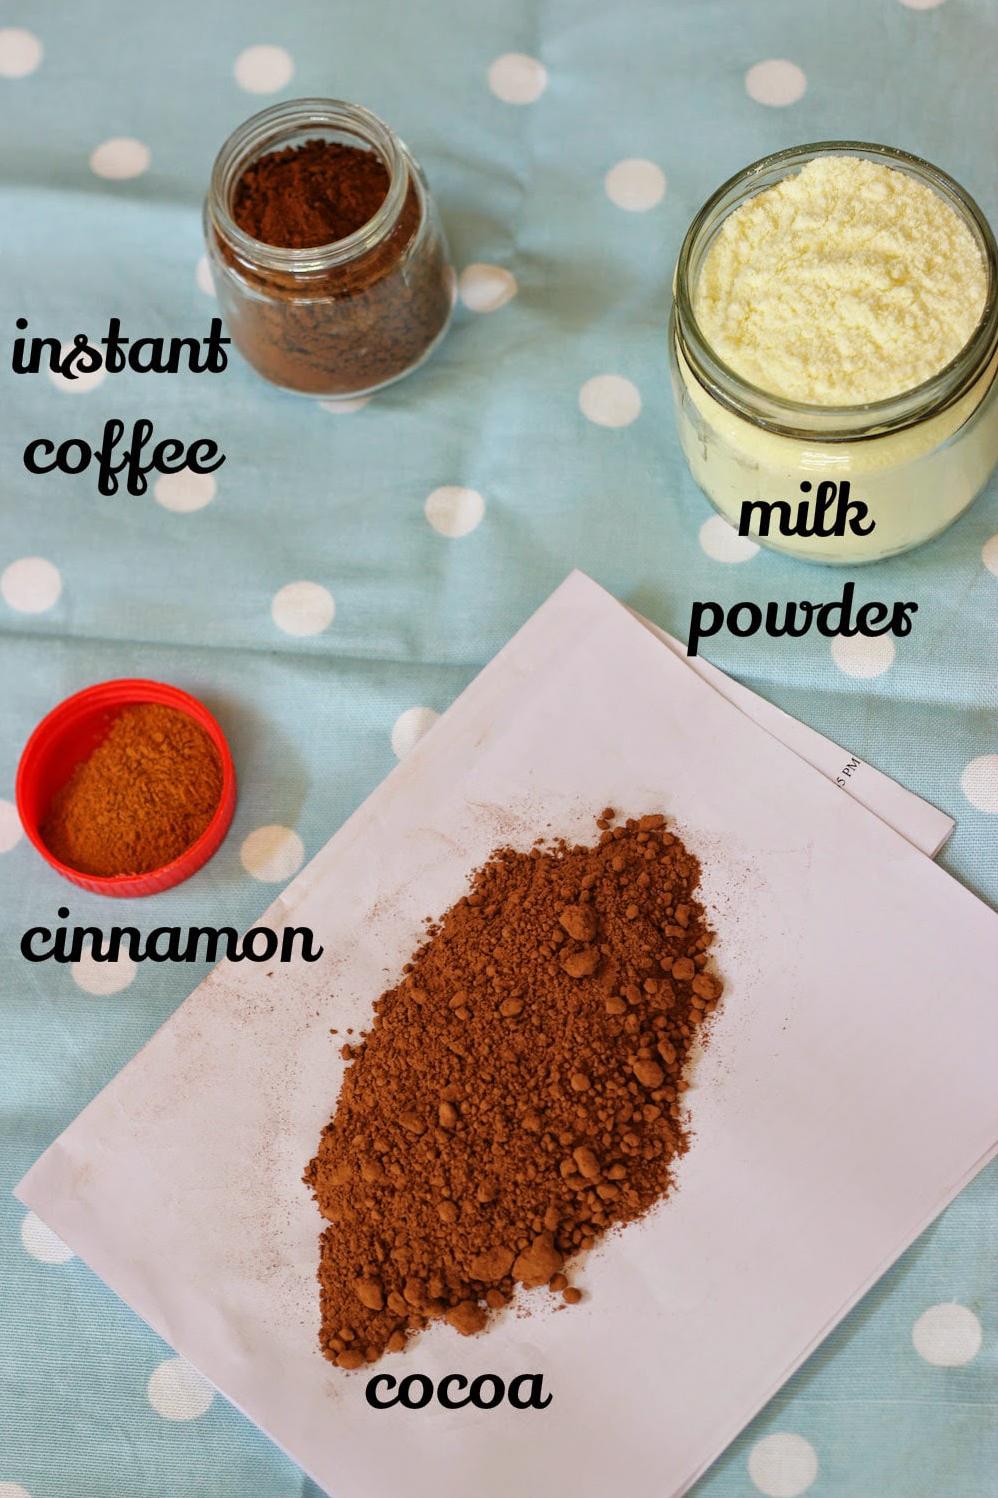  Add some magic to your mornings with this heavenly Homemade Mocha Mix.